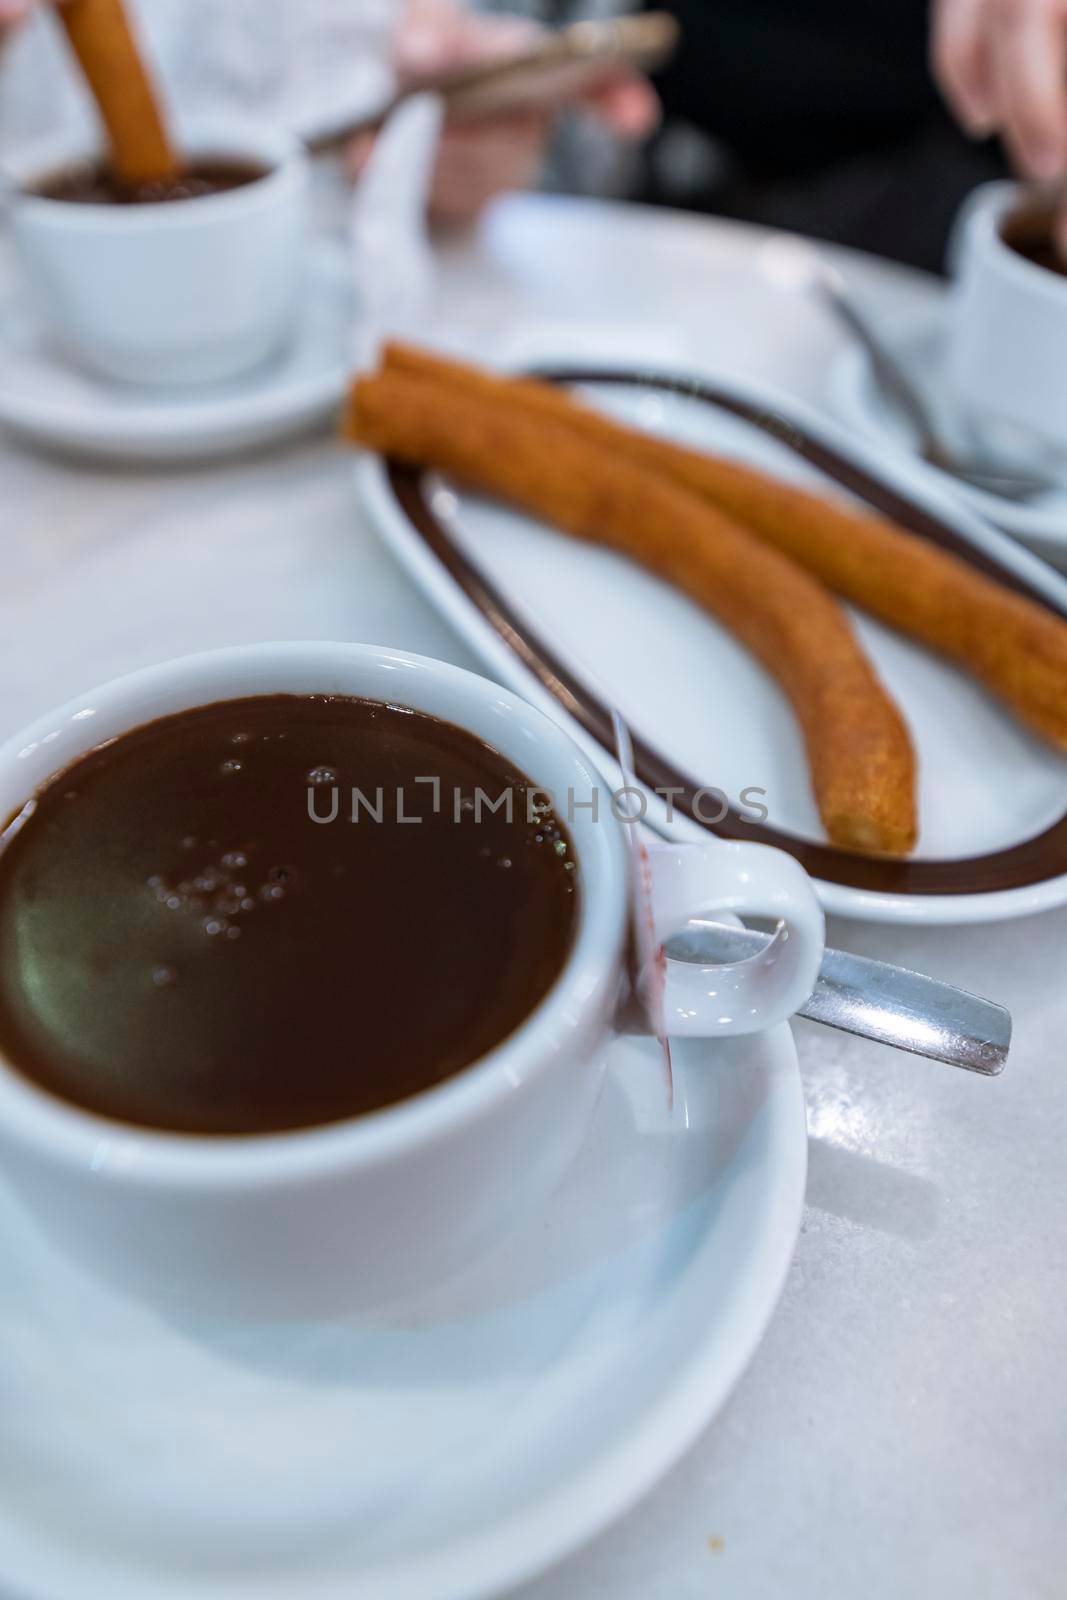 Churros with chocolate by cabrera